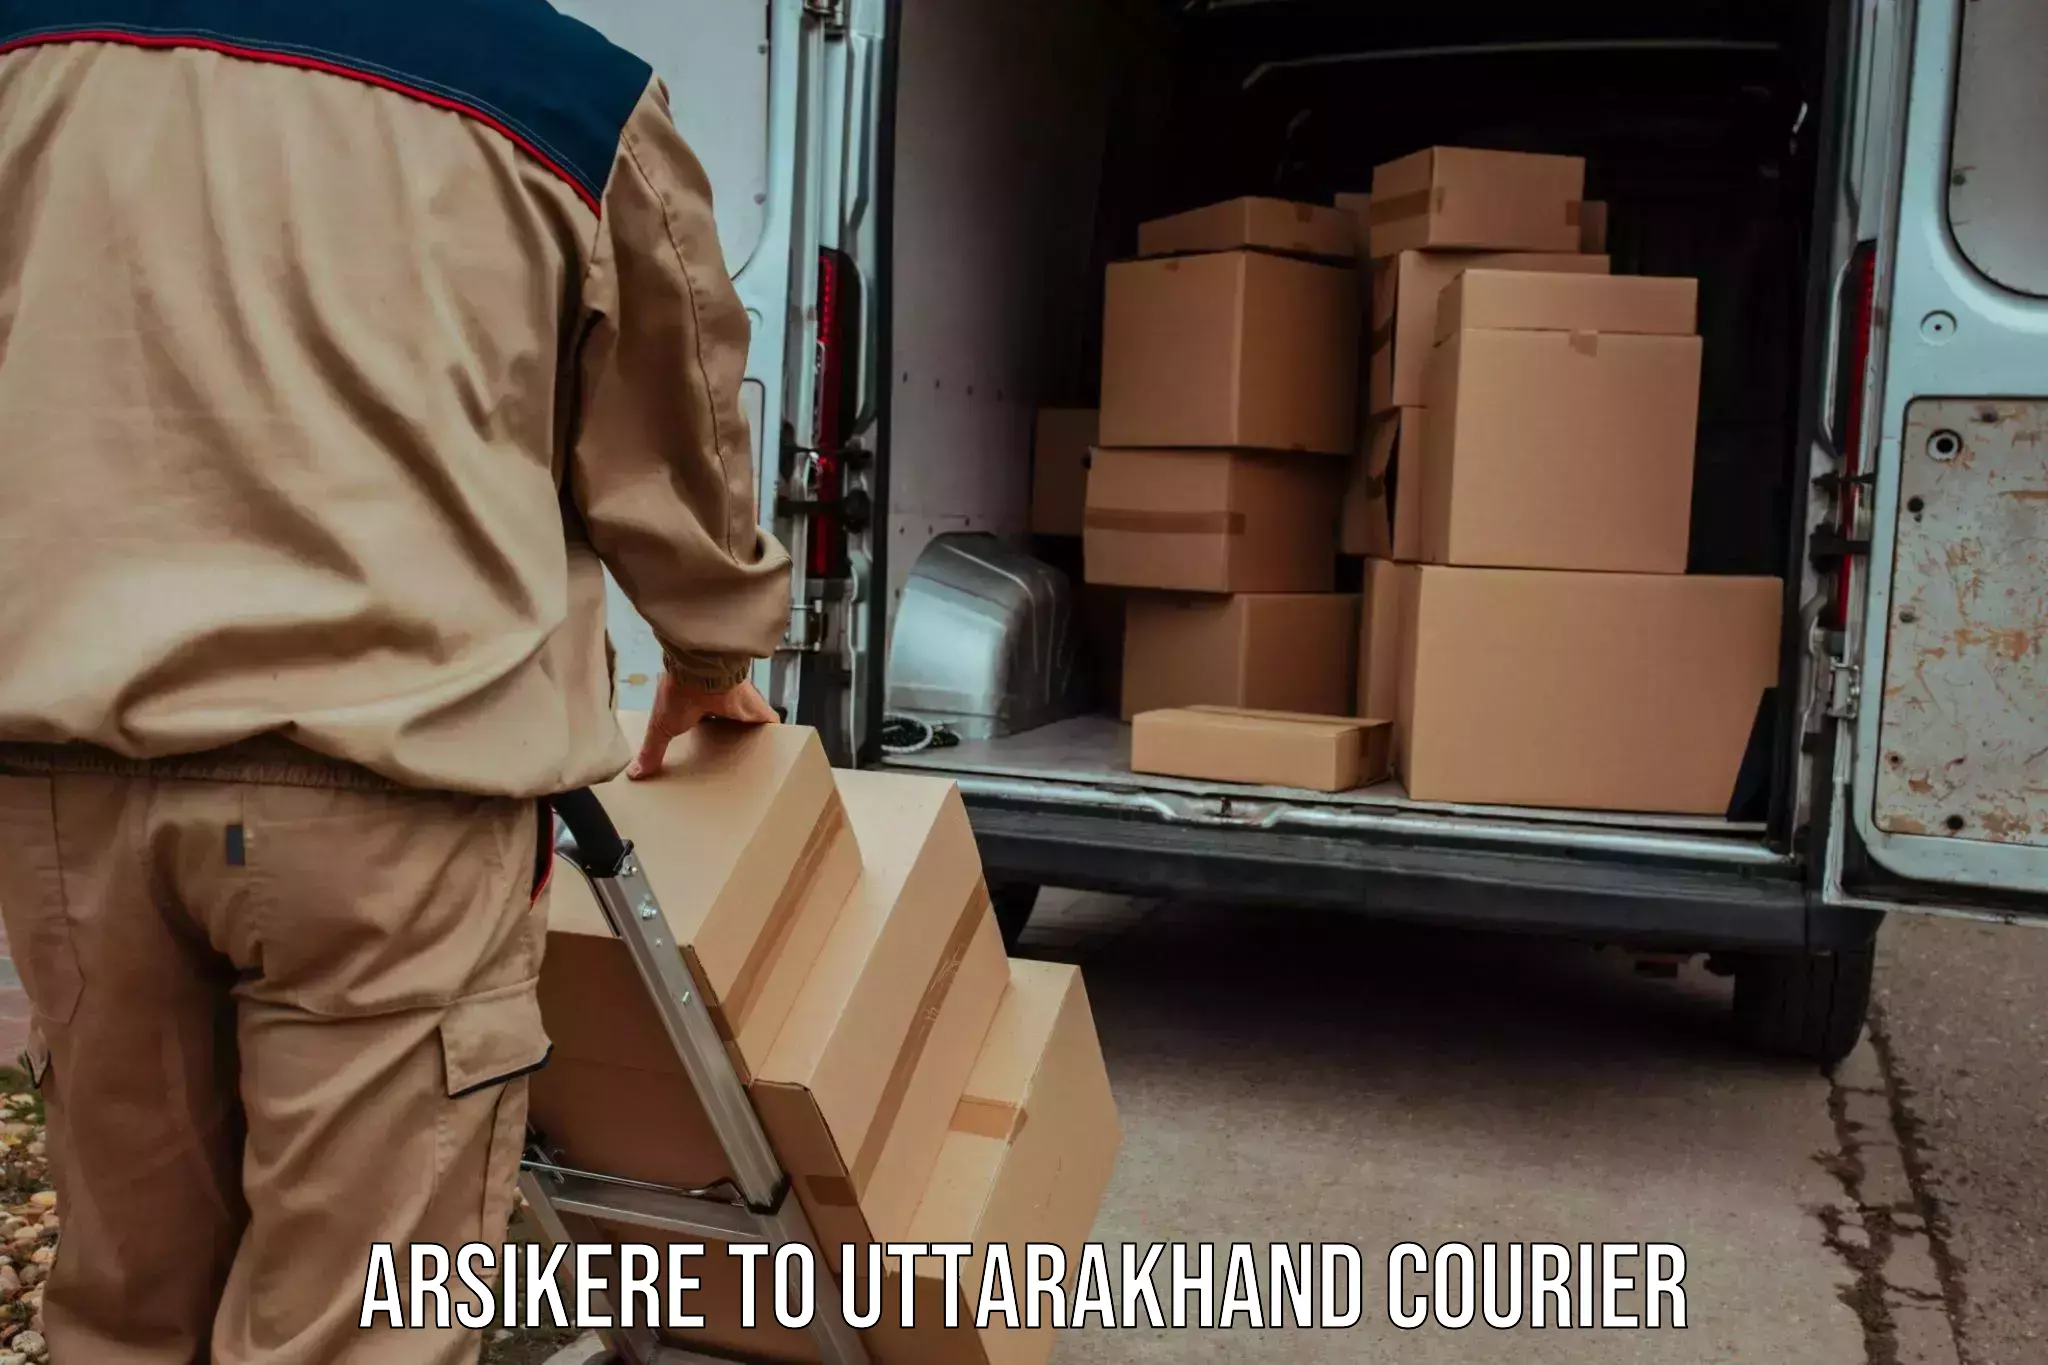 Courier service partnerships Arsikere to Rudraprayag